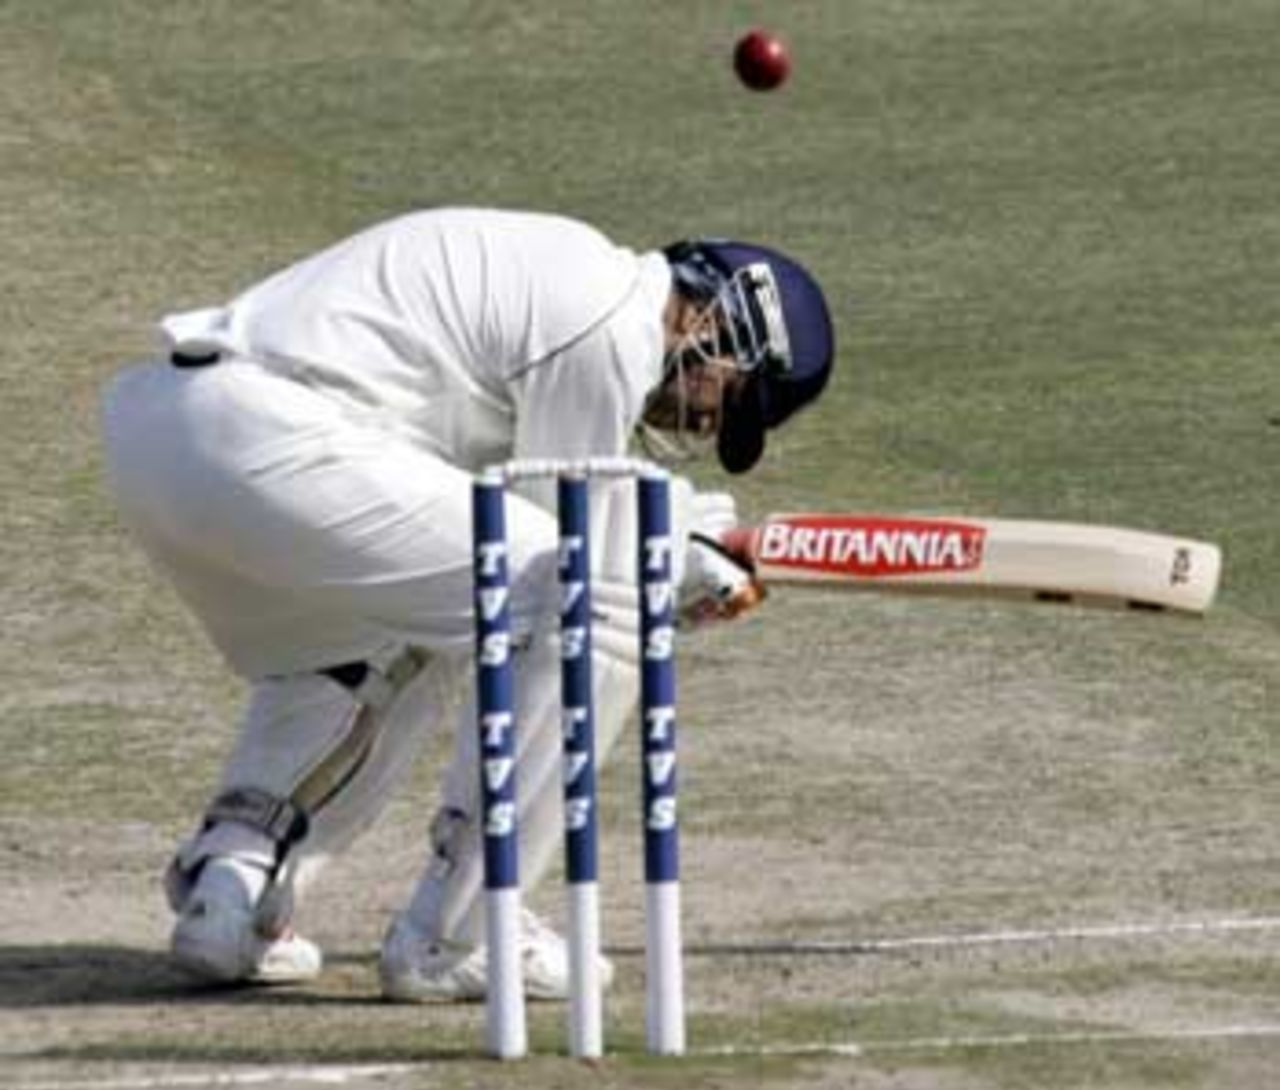 Virender Sehwag was made to duck a few times as Pakistan tried to curb his aggression, India v Pakistan, 1st Test, Mohali, March 10, 2005